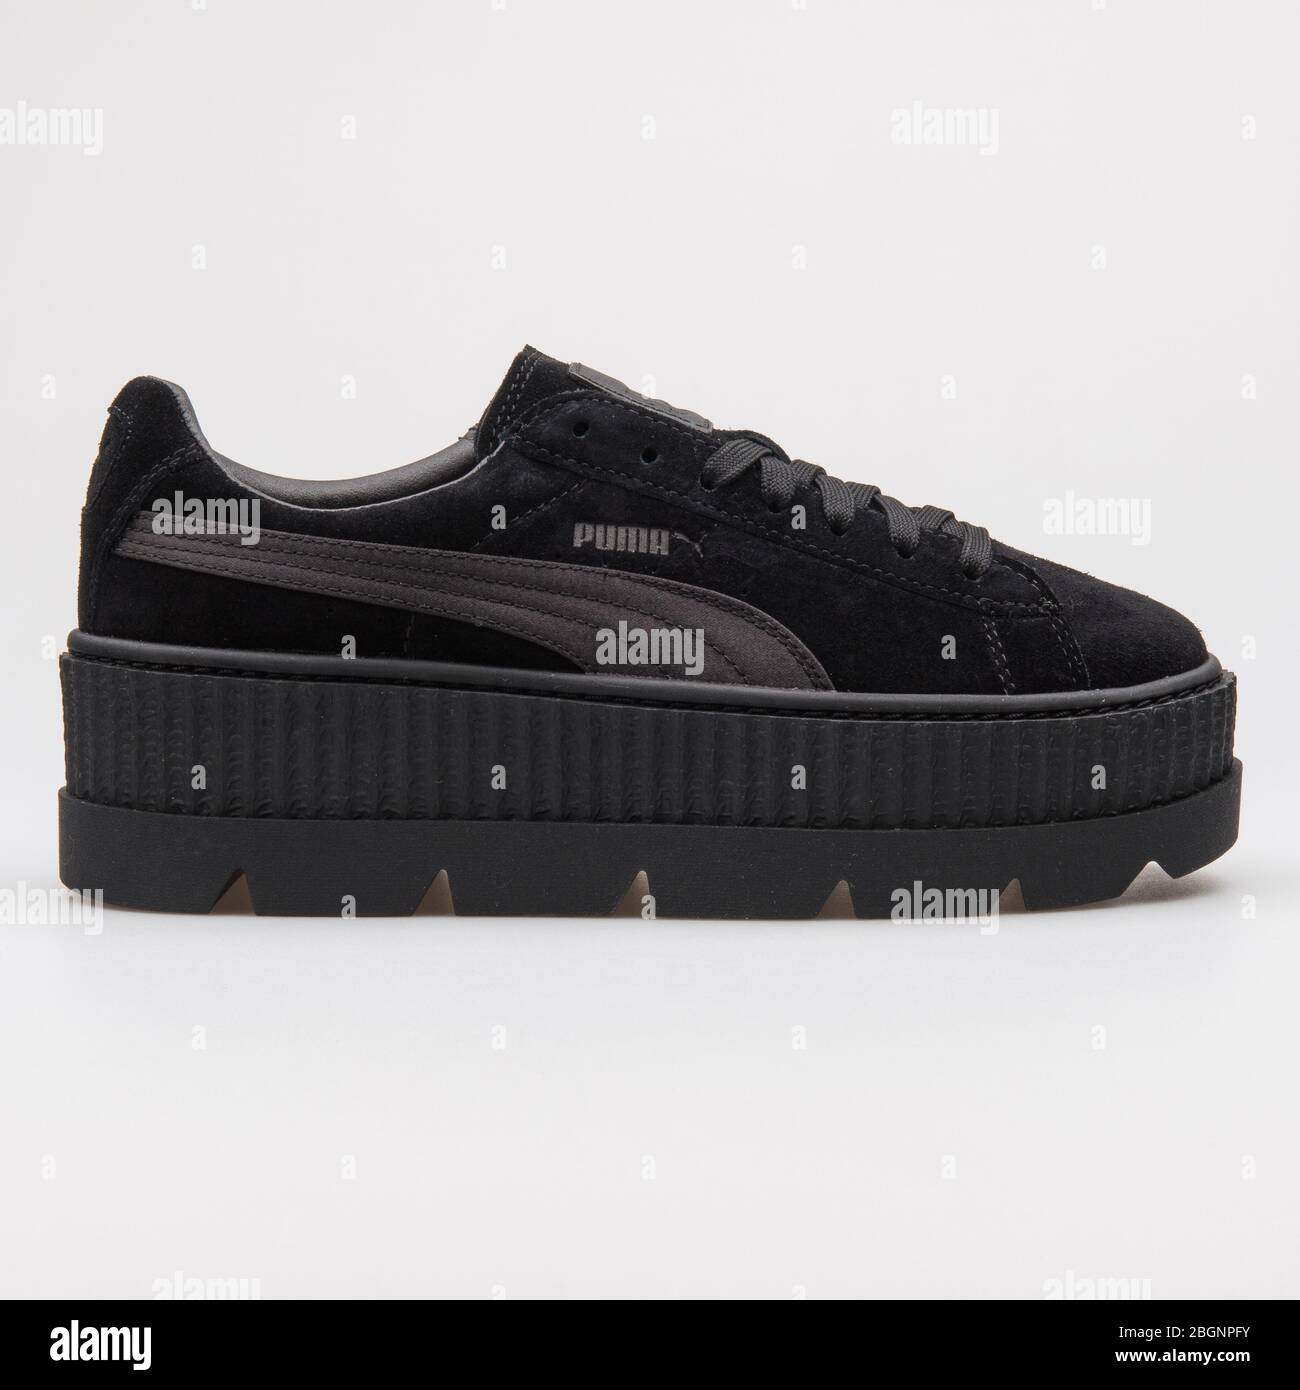 VIENNA, AUSTRIA - AUGUST 22, 2017: Puma Cleated Creeper Suede black sneaker  on white background Stock Photo - Alamy